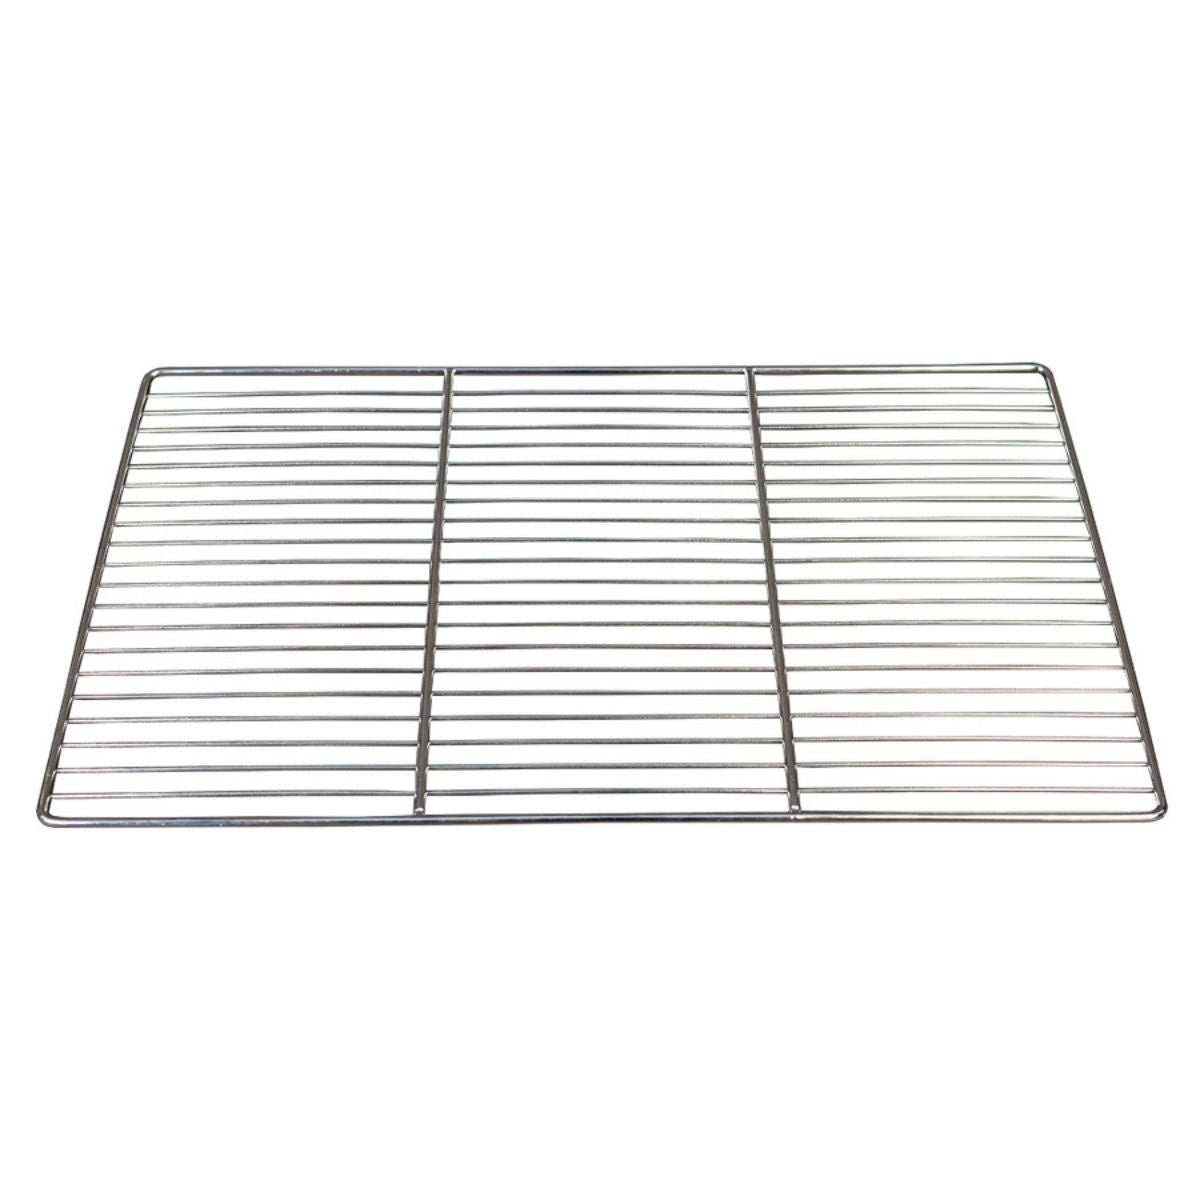 Top Food Grate Accessory for Barbeque Grill with 6 Skewers 2